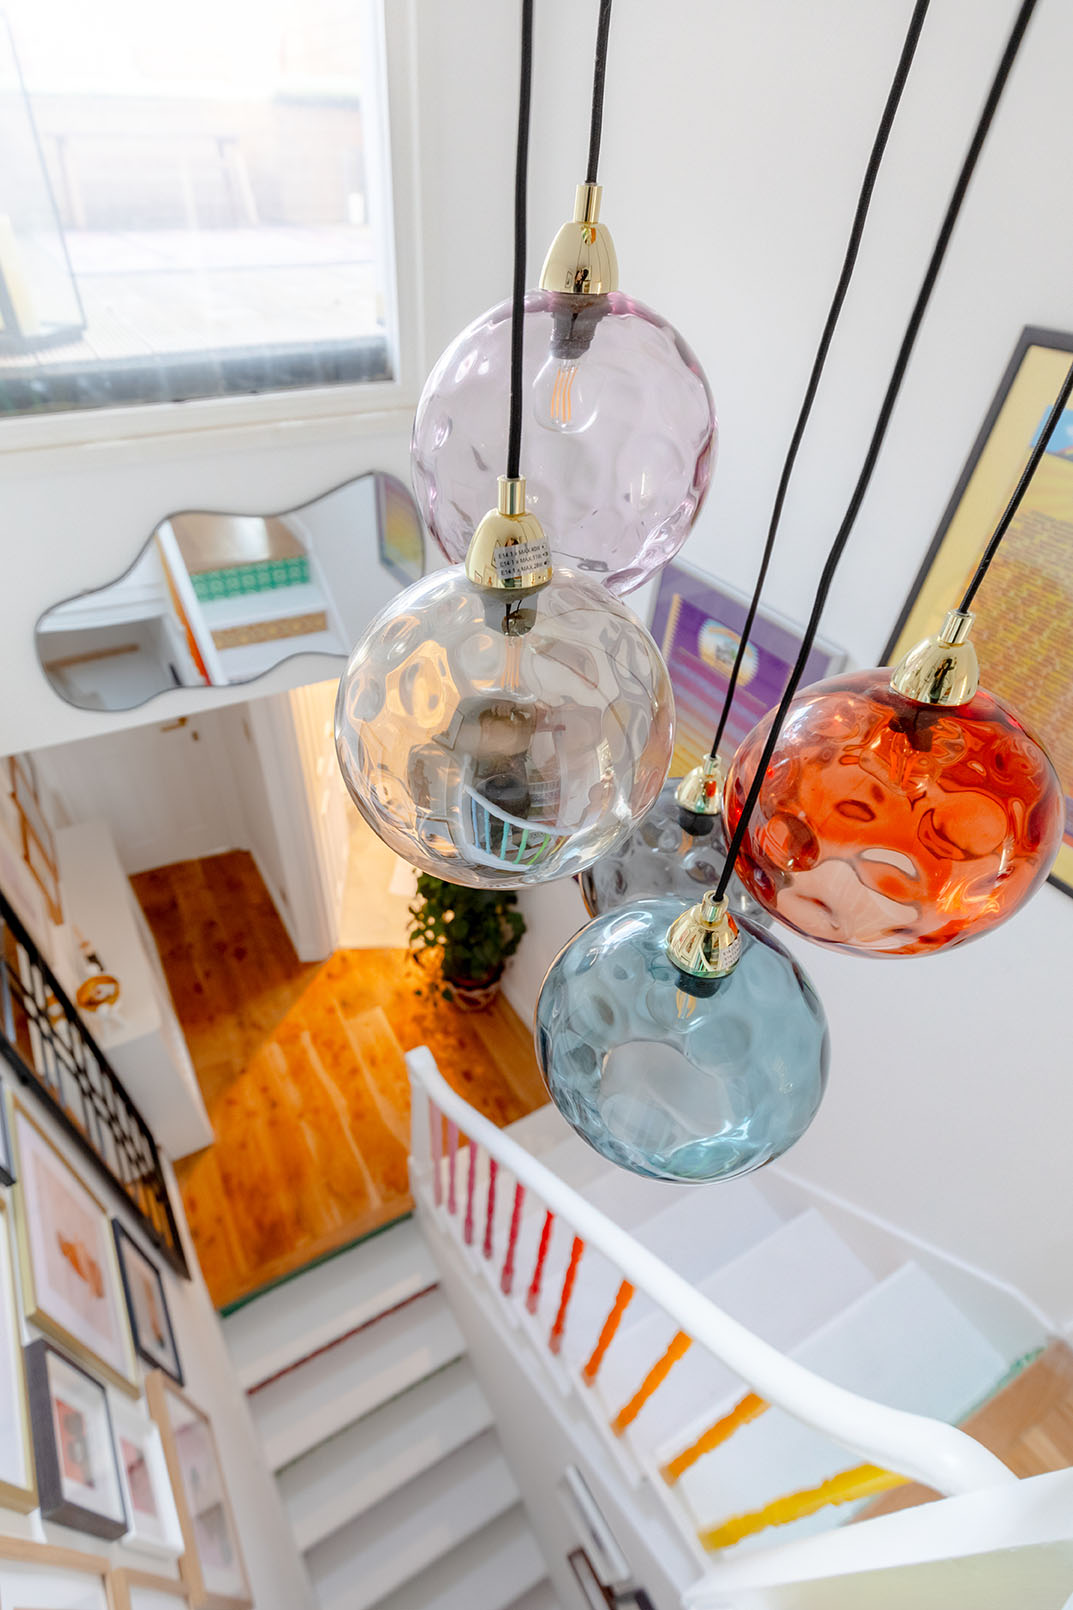 Coloured glass lights hanging from the ceiling, photo taken for Airbnb home listing